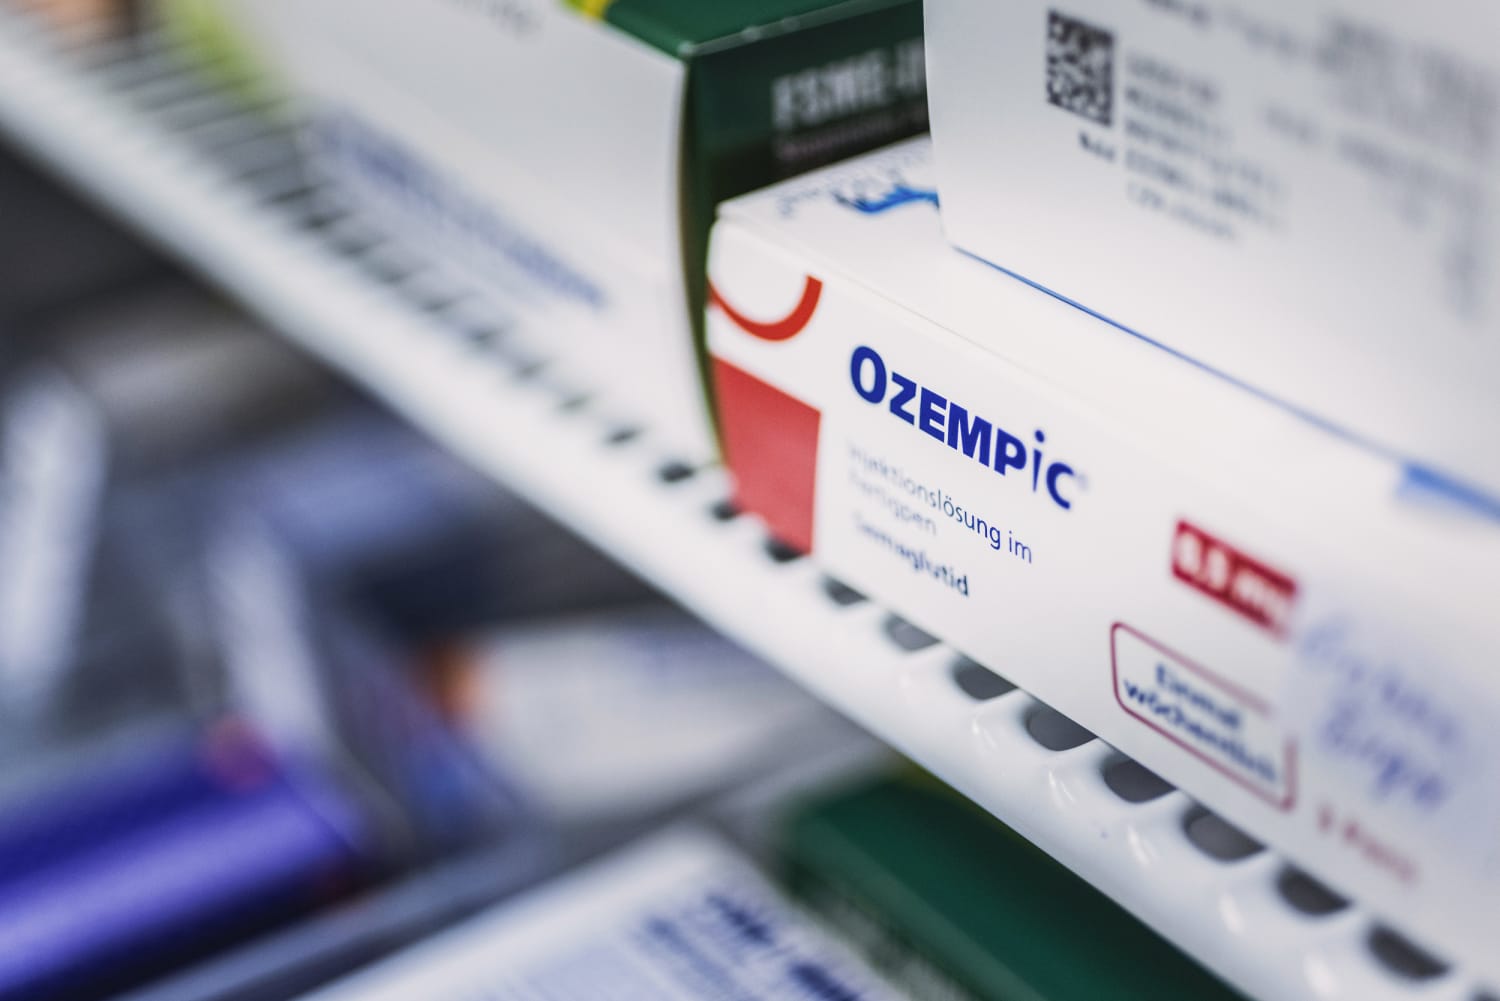 Counterfeit Ozempic found in US drug supply, FDA warns - ABC News